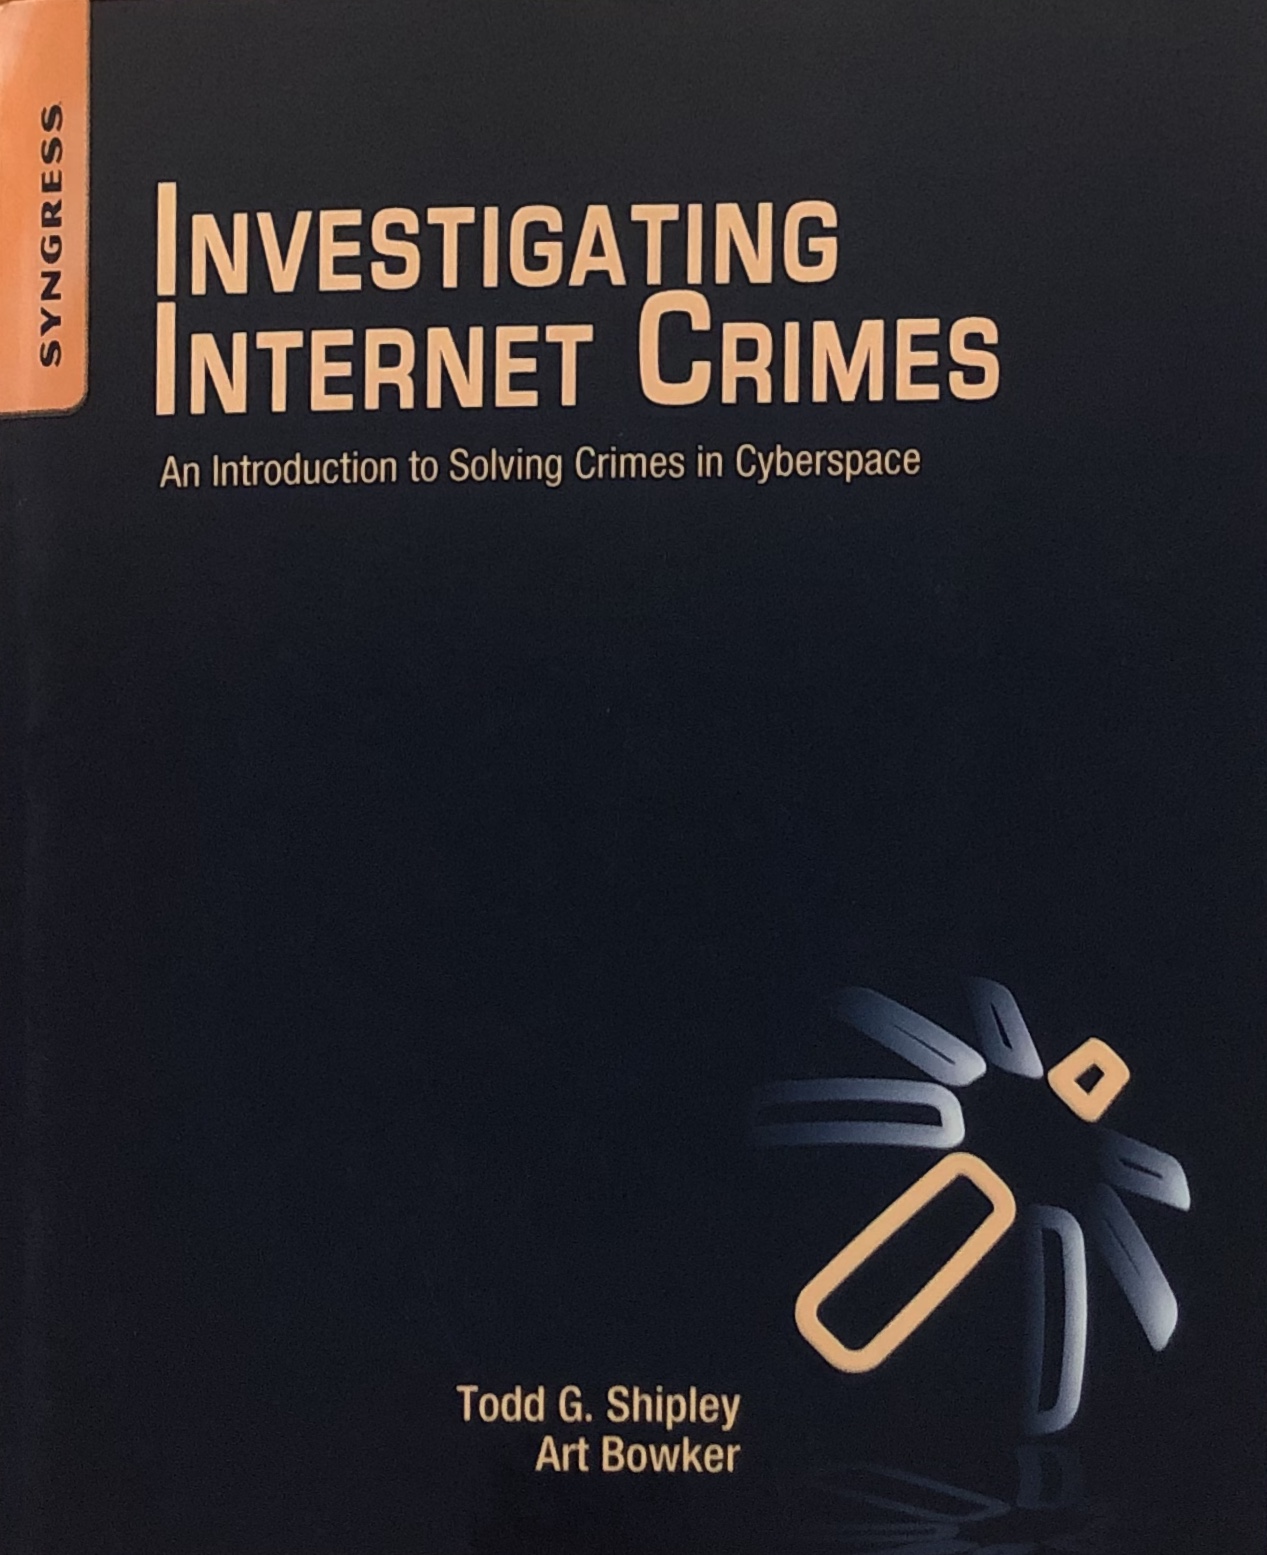 Description Investigating Internet Crimes: An Introduction to Solving Crimes in Cyberspace